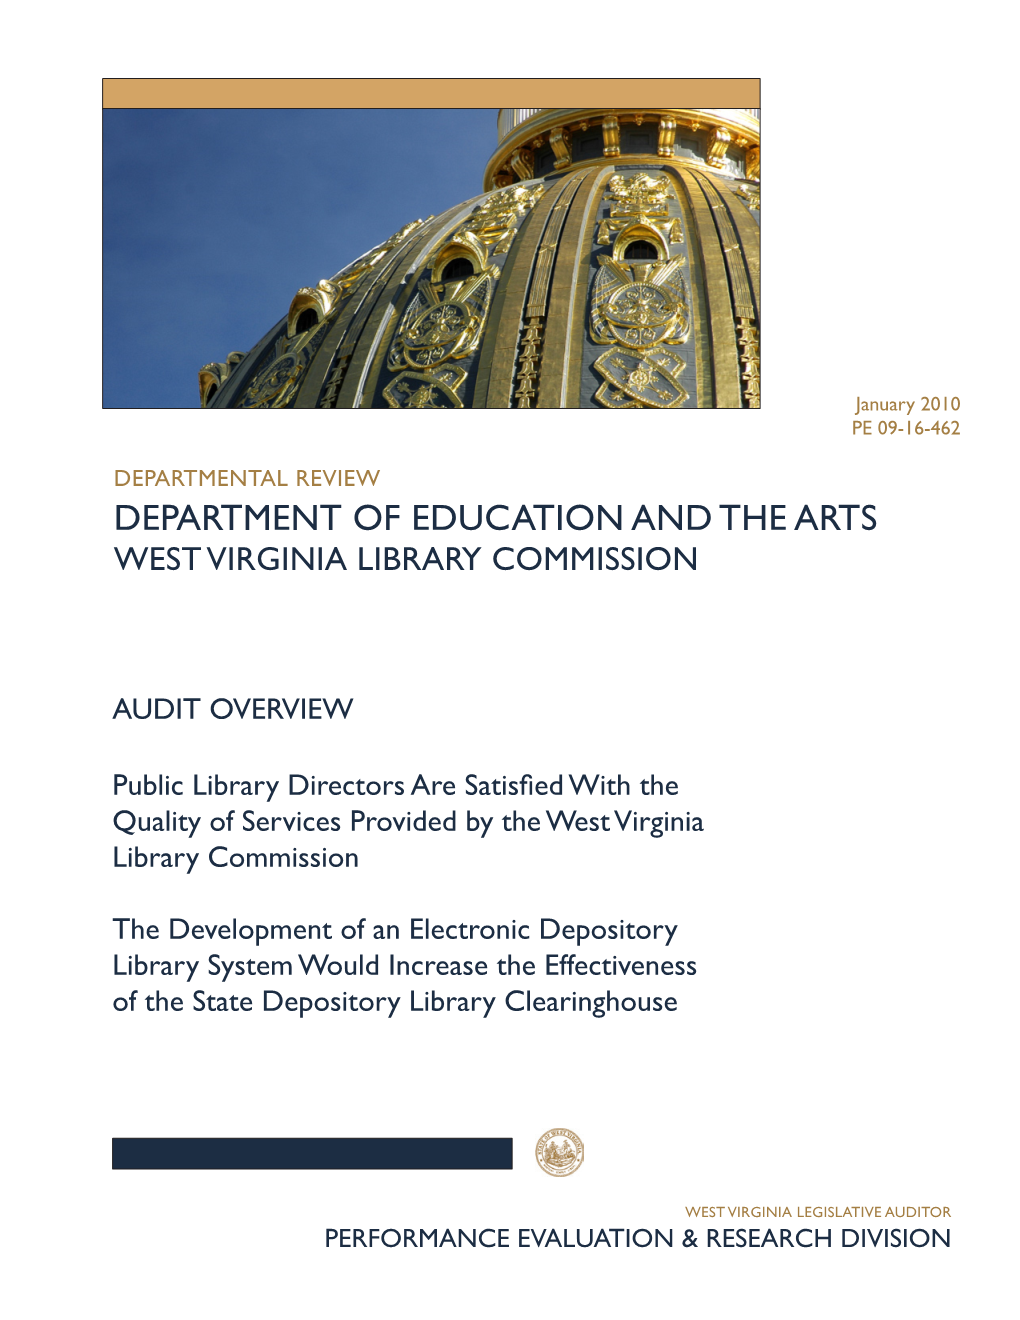 Department of Education and the Arts West Virginia Library Commission